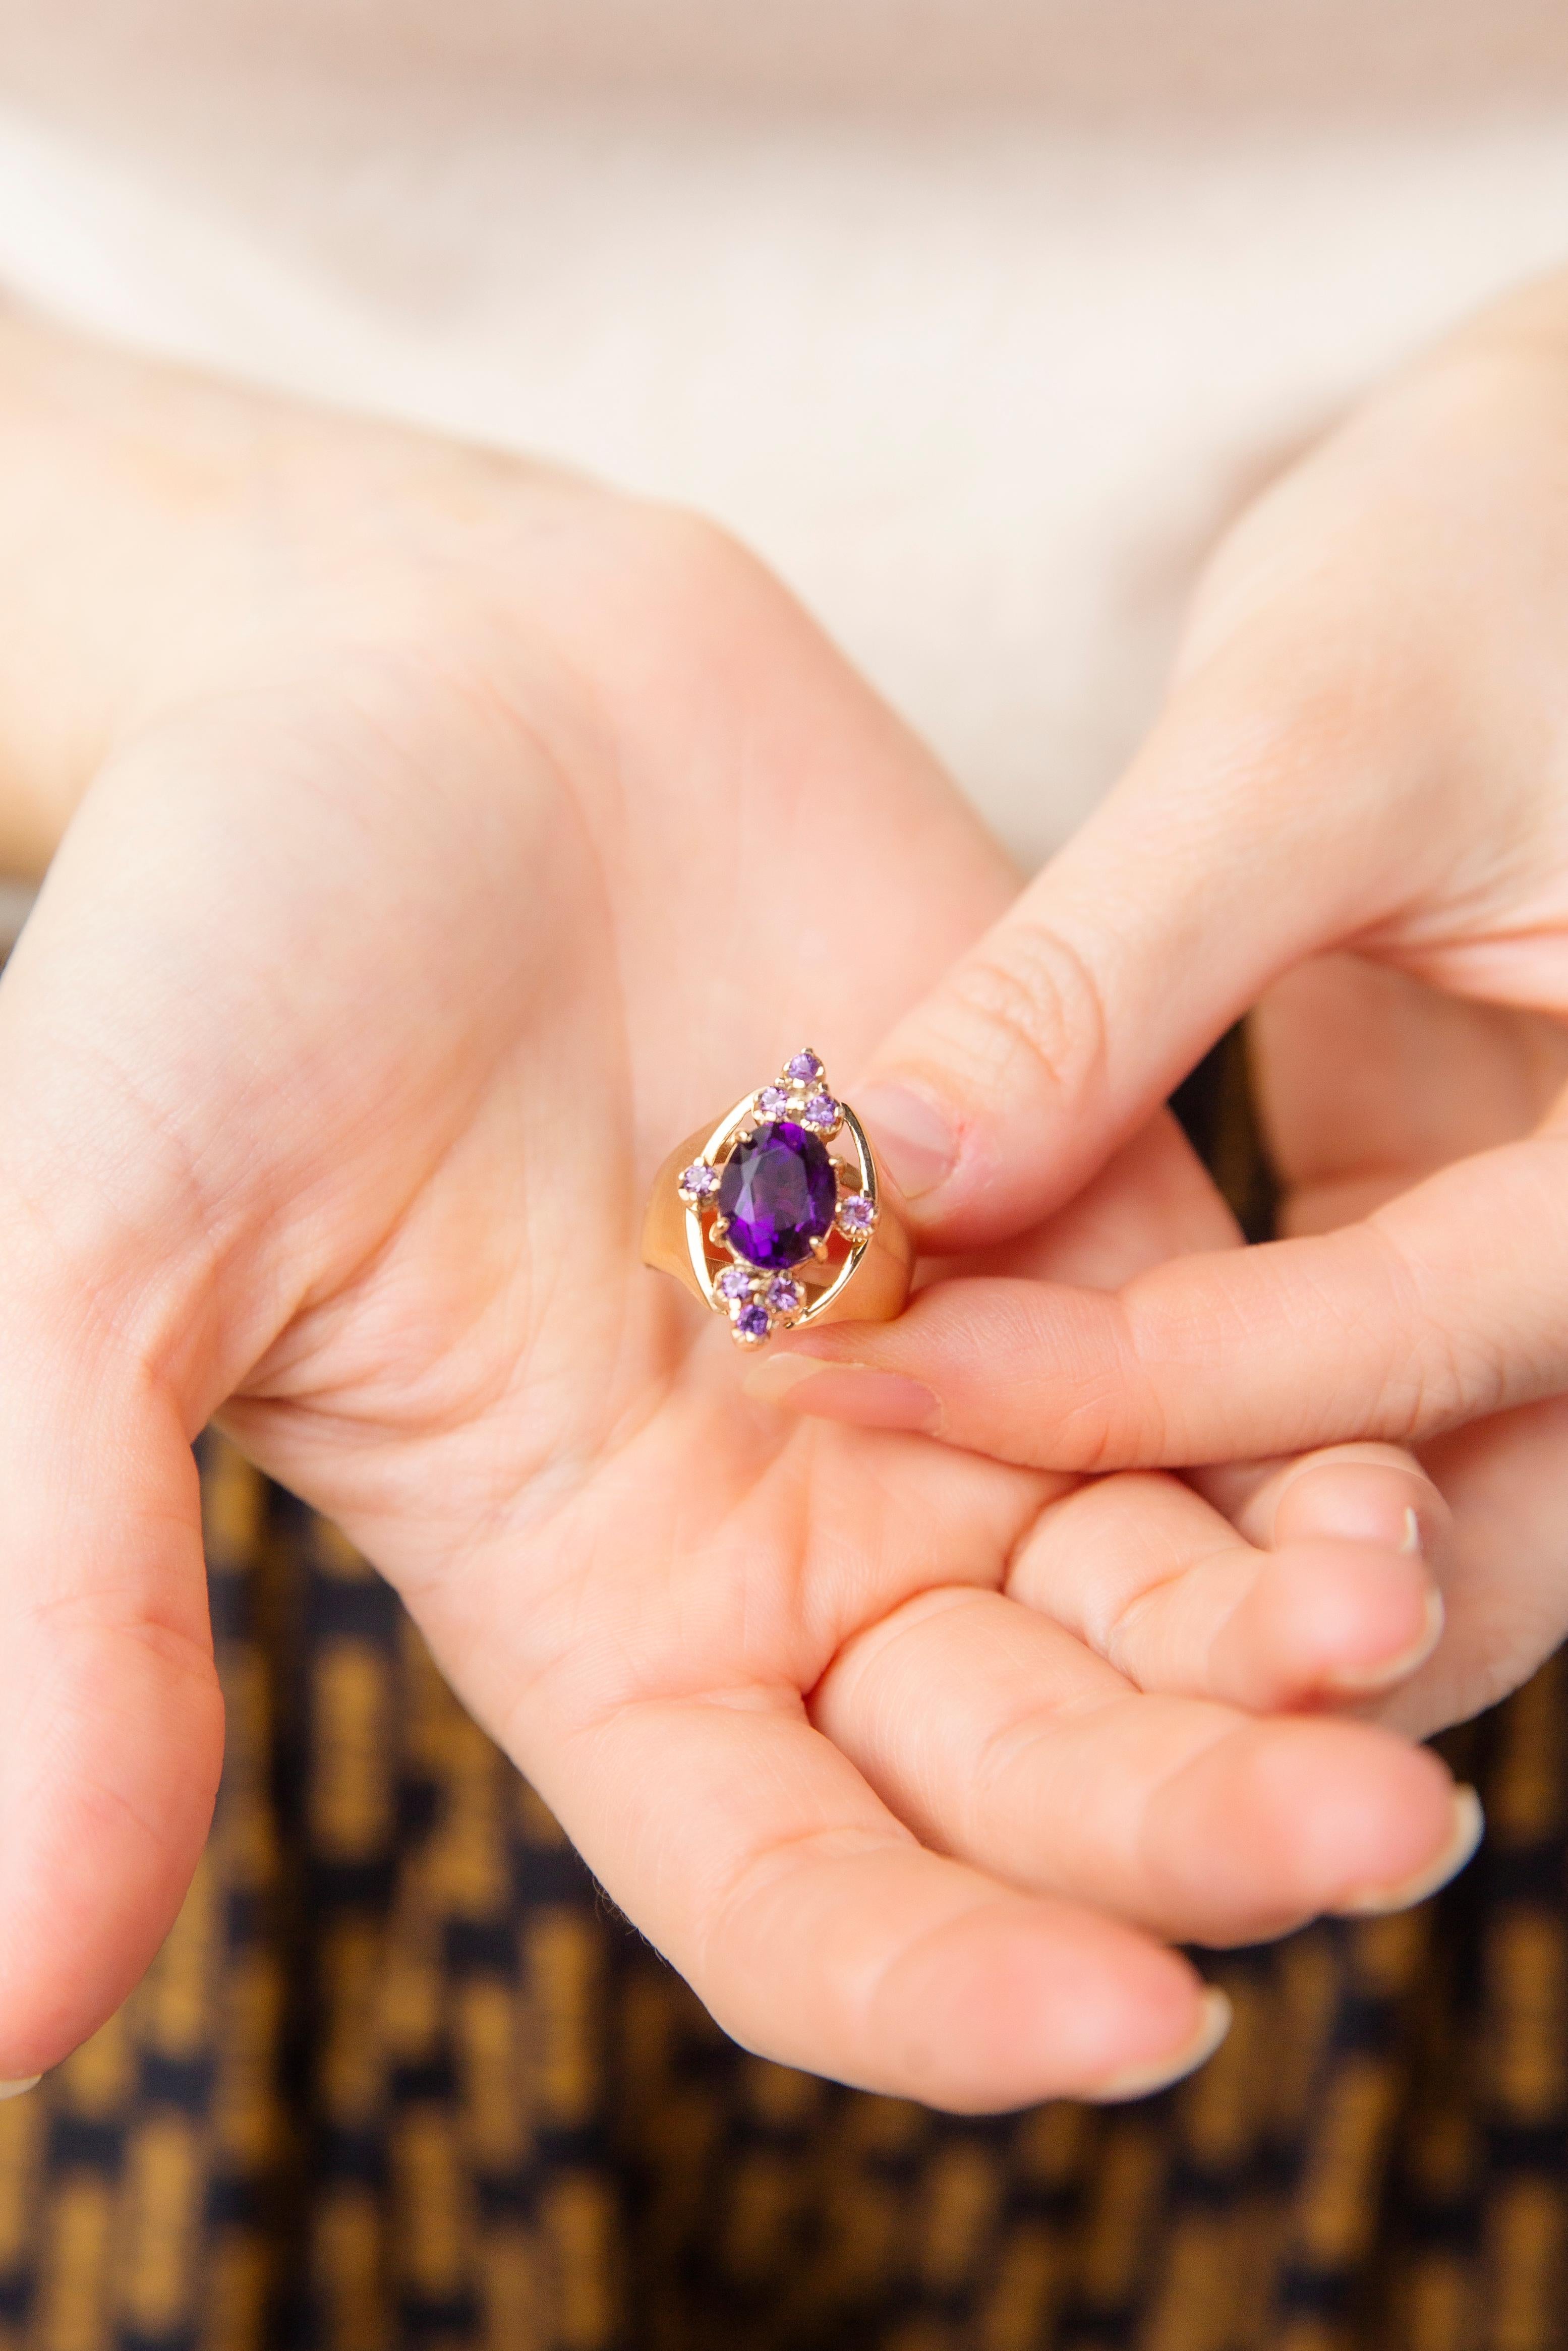 Expertly crafted in 9 carat gold, The Cordelia Ring is a stunning vintage jewel. Her ample band rises to an oval setting crowned with vivid amethysts that move and dance in the twinkling of evening lights, evoking memories of balmy midnight